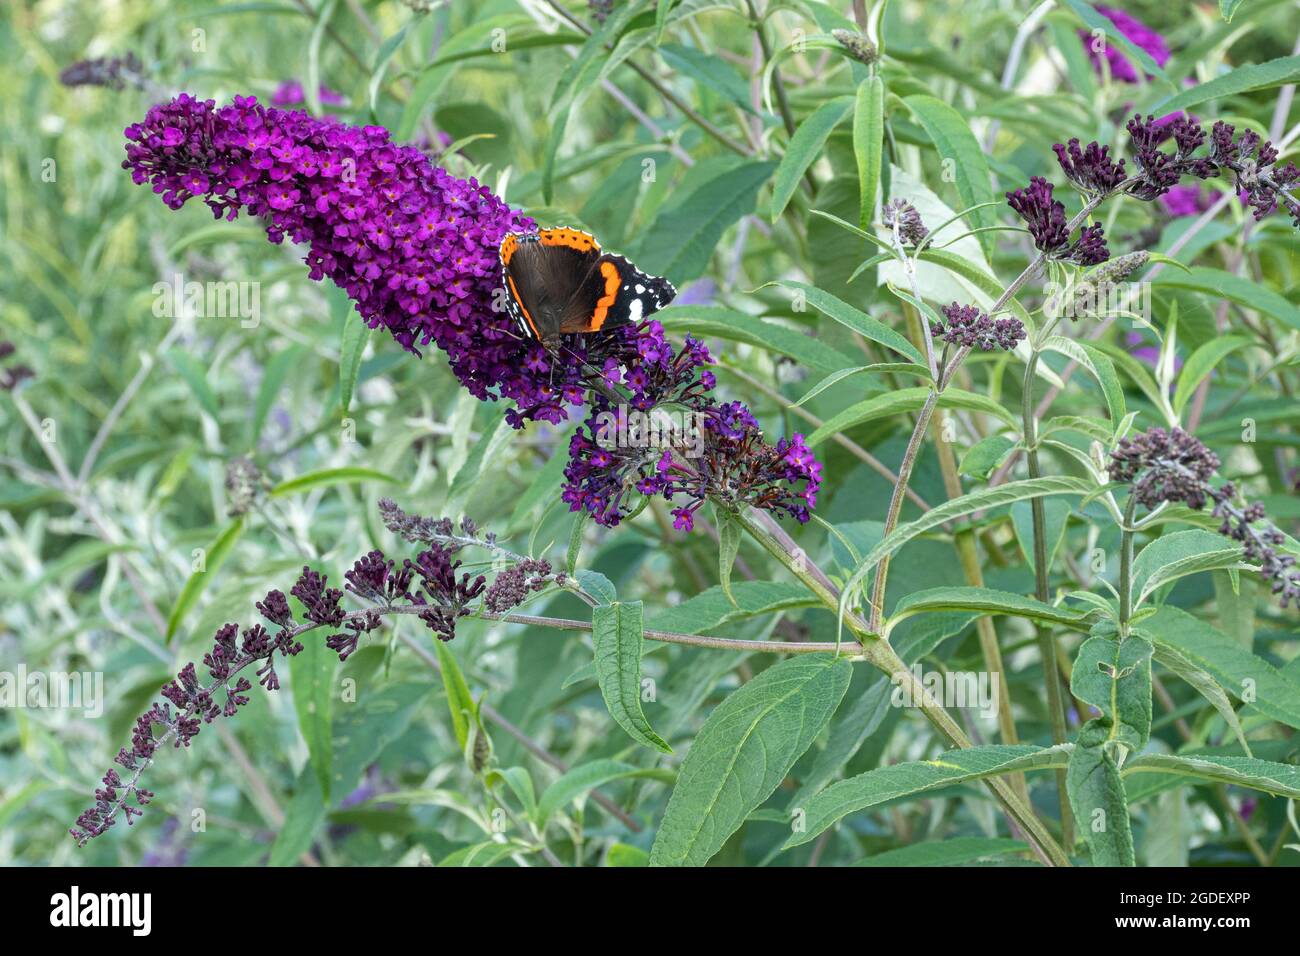 Red admiral butterfly Vanessa atalanta on Buddleja davidii Royal Red flower (buddleia variety), known as a butterfly bush, during august or summer, UK Stock Photo